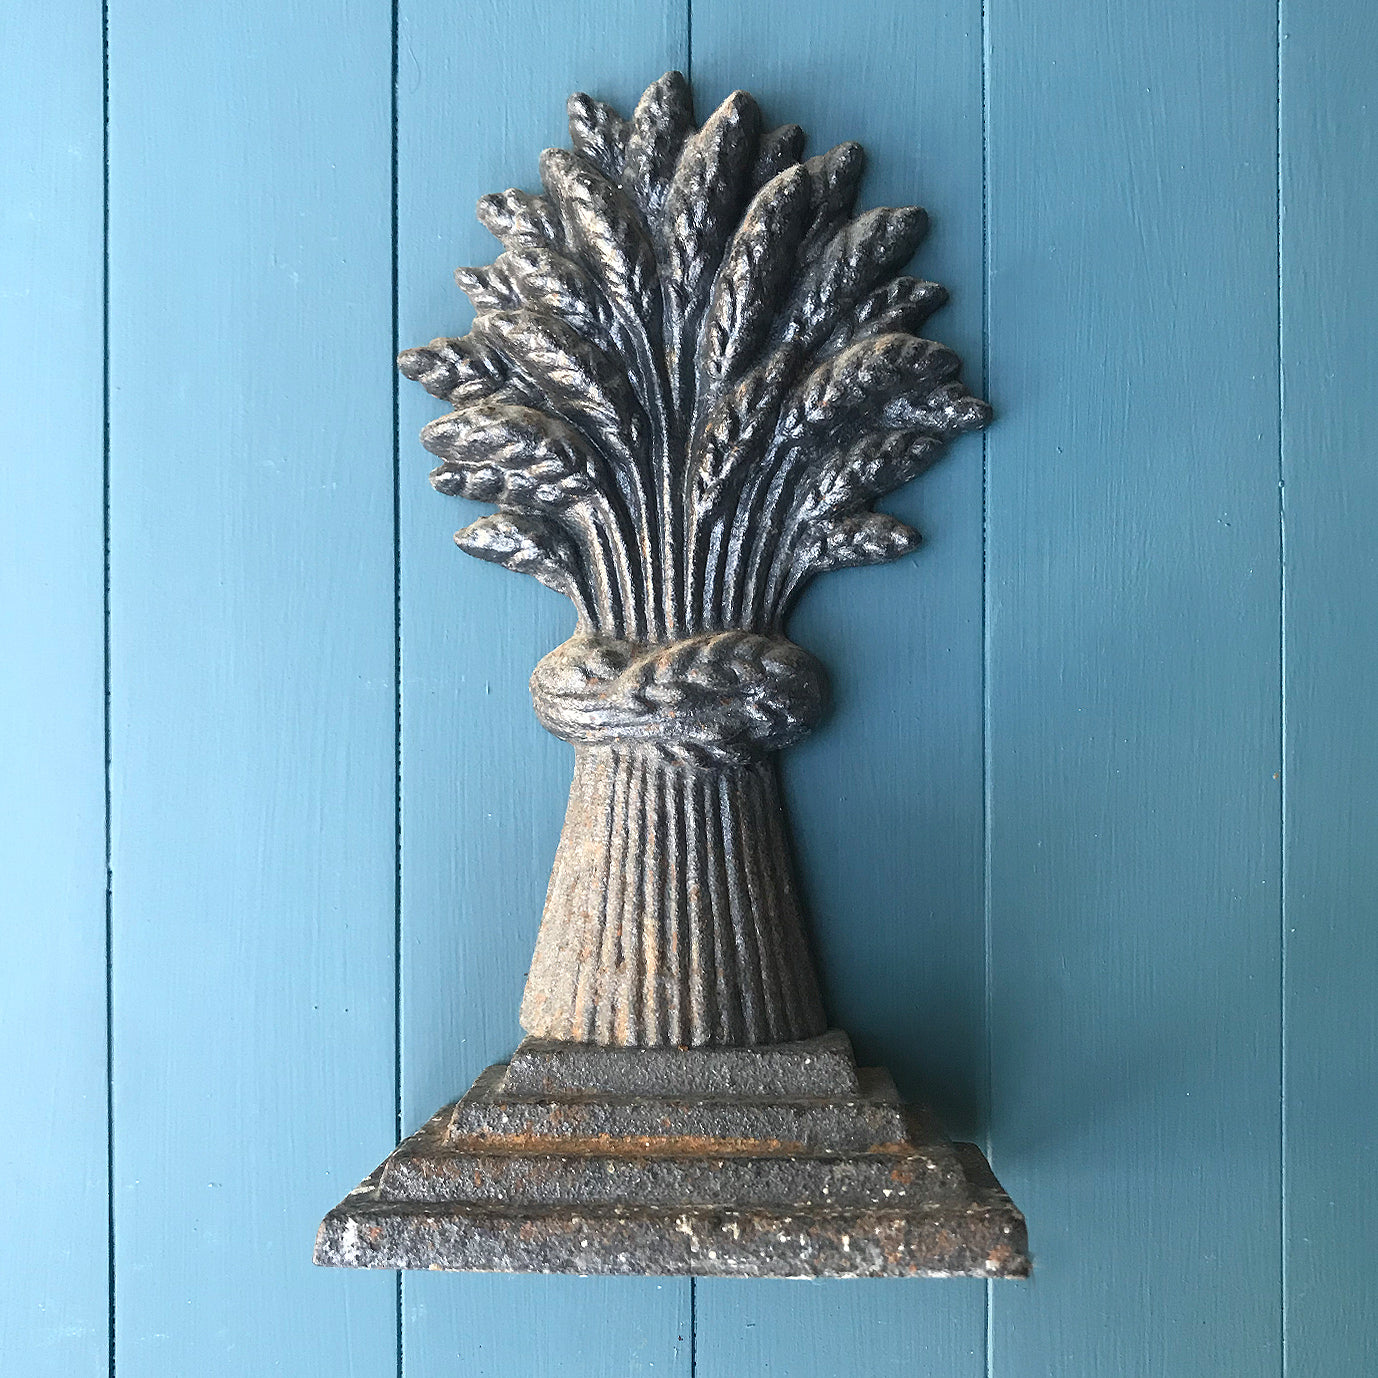 Nice and heavy Vintage Cast Iron Door Stop. A useful and decorative piece for the home - SHOP NOW - www.intovintage.co.uk